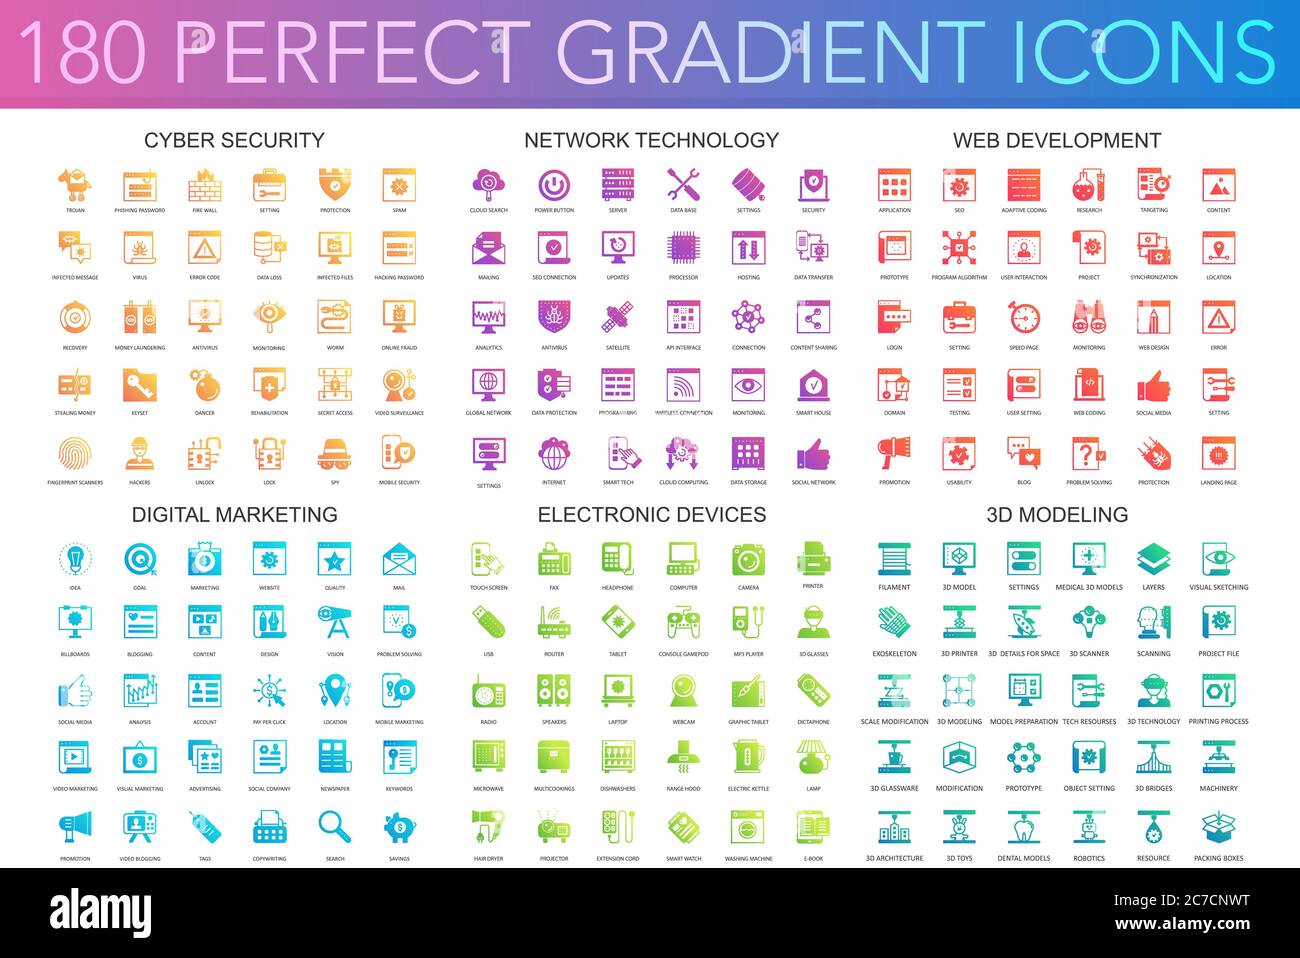 180 trendy perfect gradient icons set of cyber security, network technology, web development, digital marketing, electronic devices, 3d modeling Stock Vector